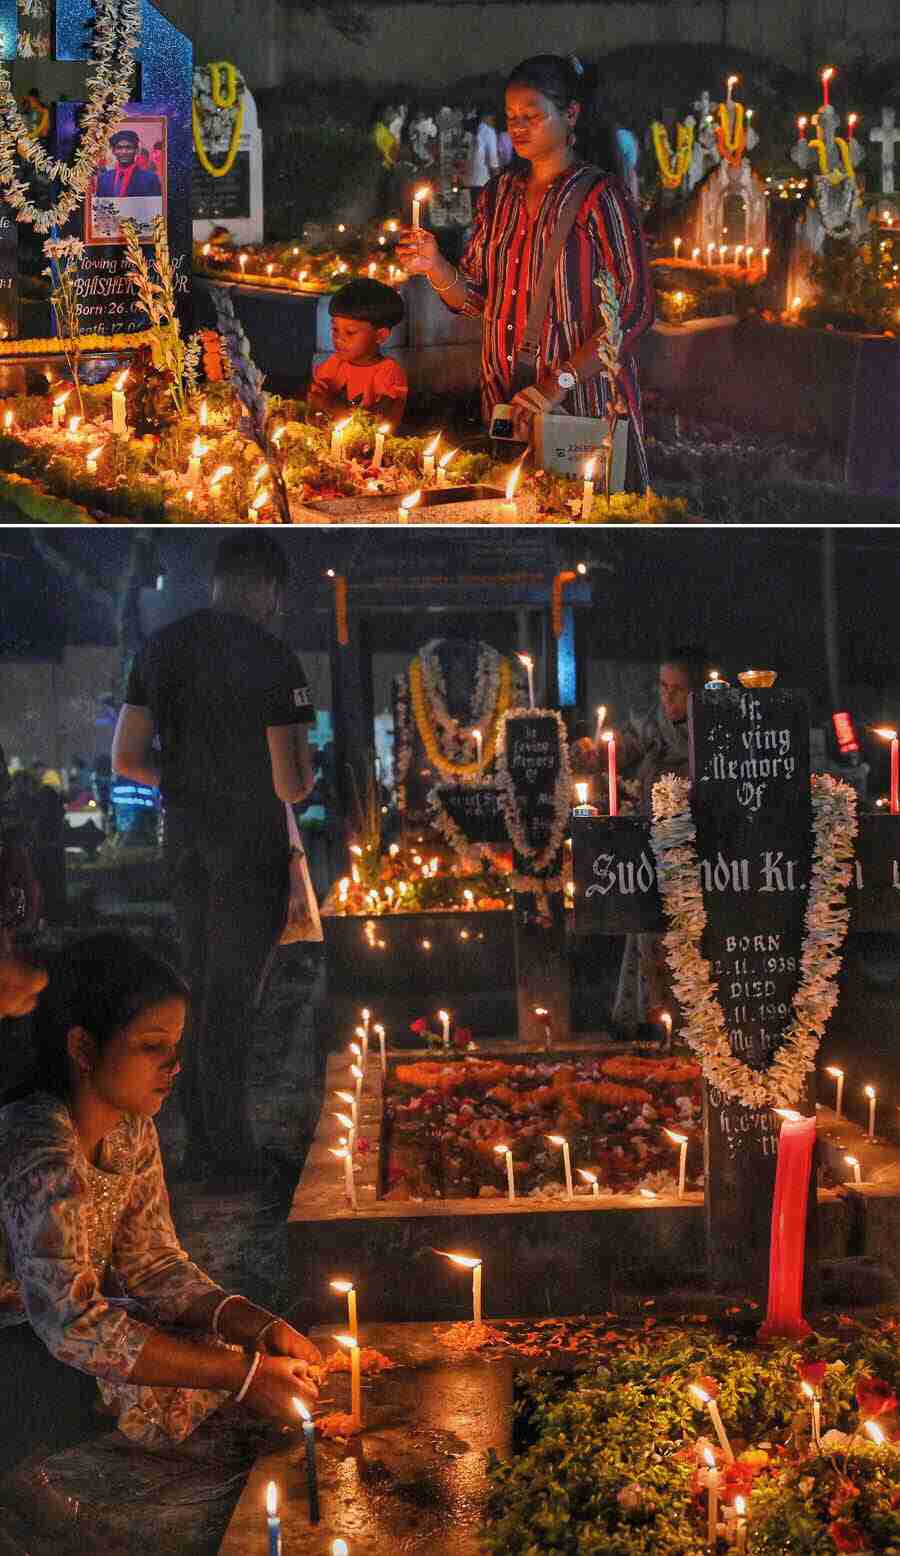 The graves at Bhowanipore cemetery let out a fragrant whiff and warm glow on Thursday evening